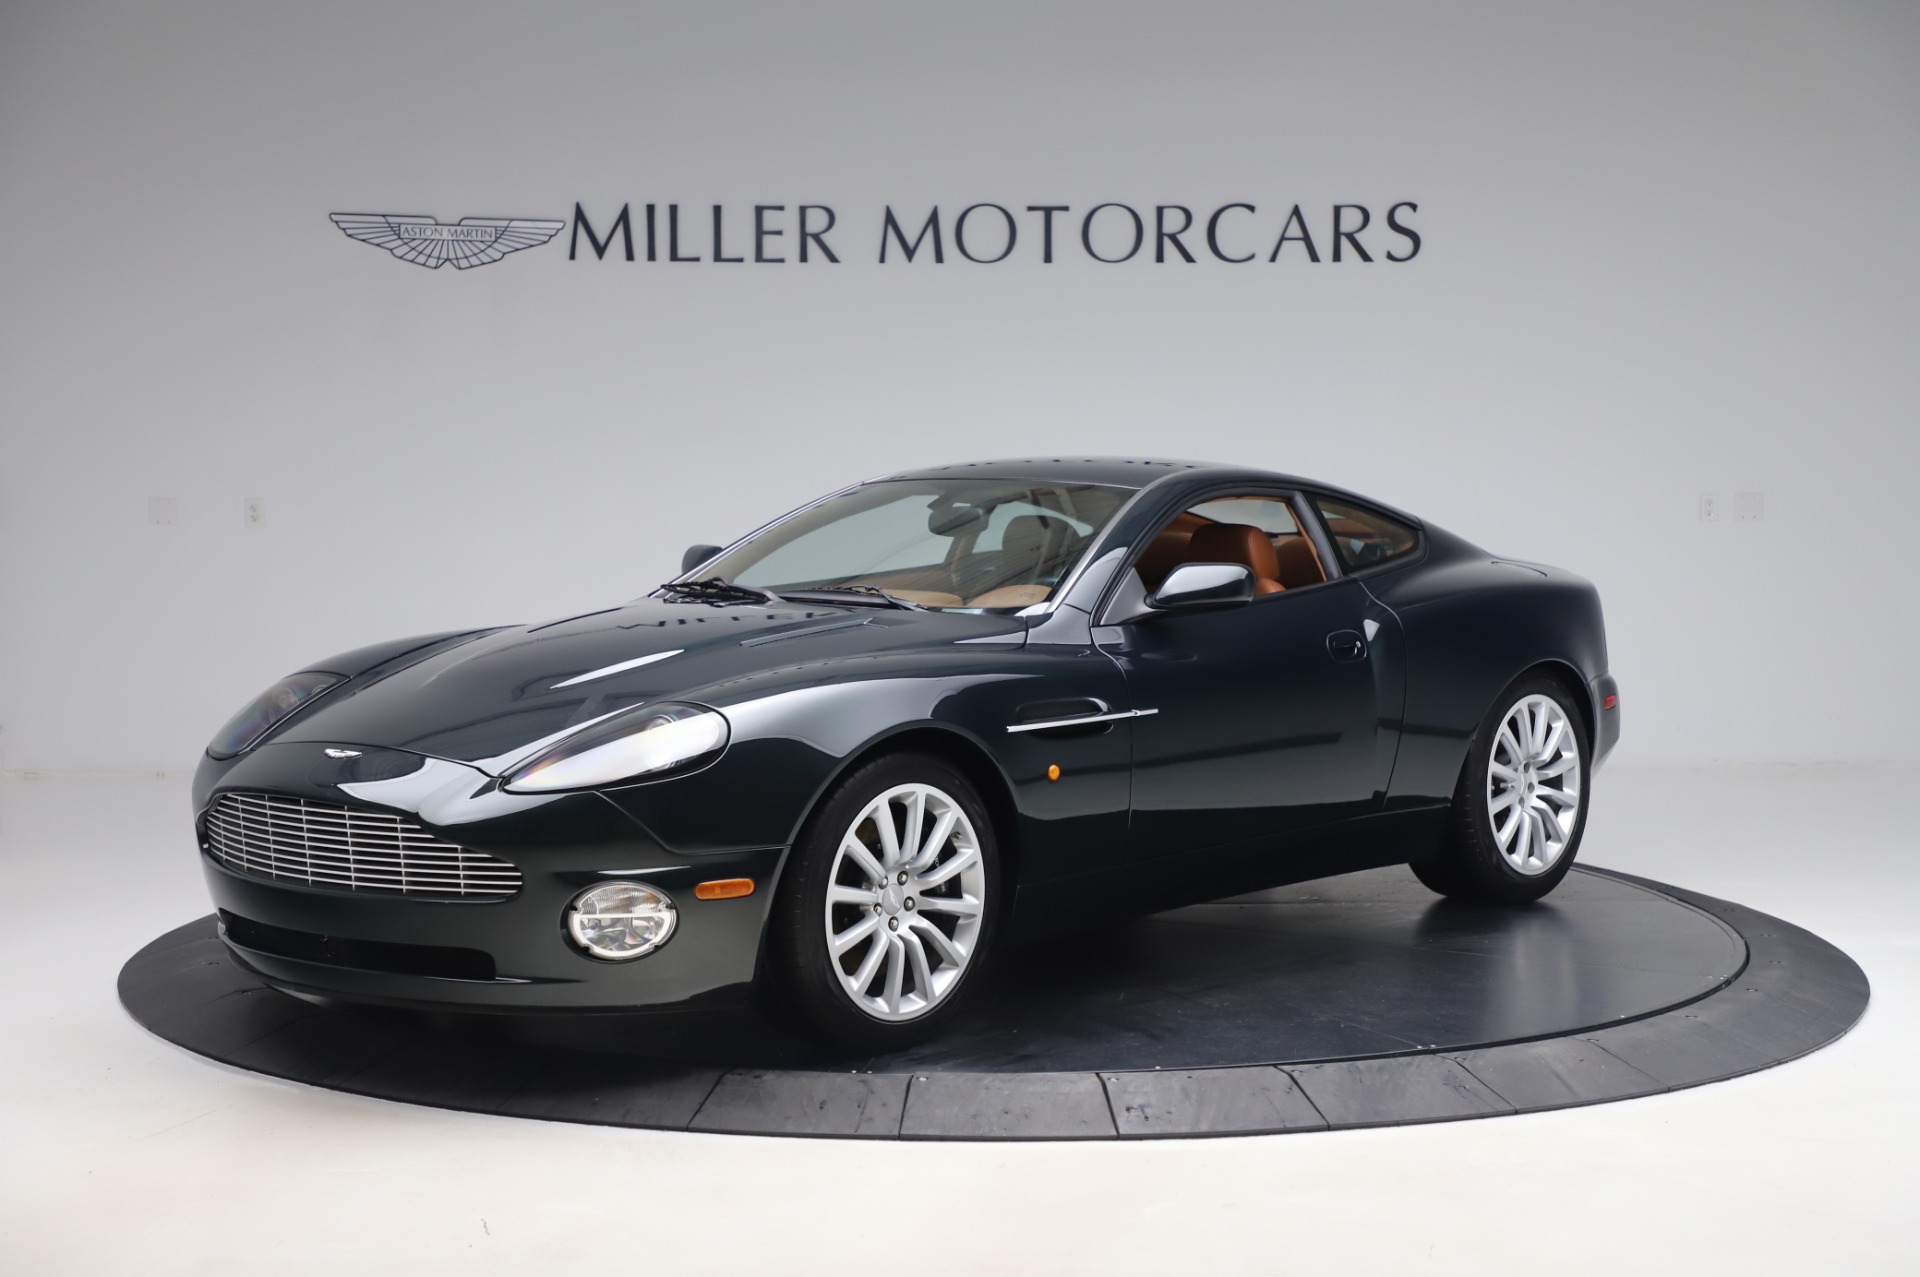 Used 2003 Aston Martin V12 Vanquish Coupe for sale $99,900 at Bentley Greenwich in Greenwich CT 06830 1